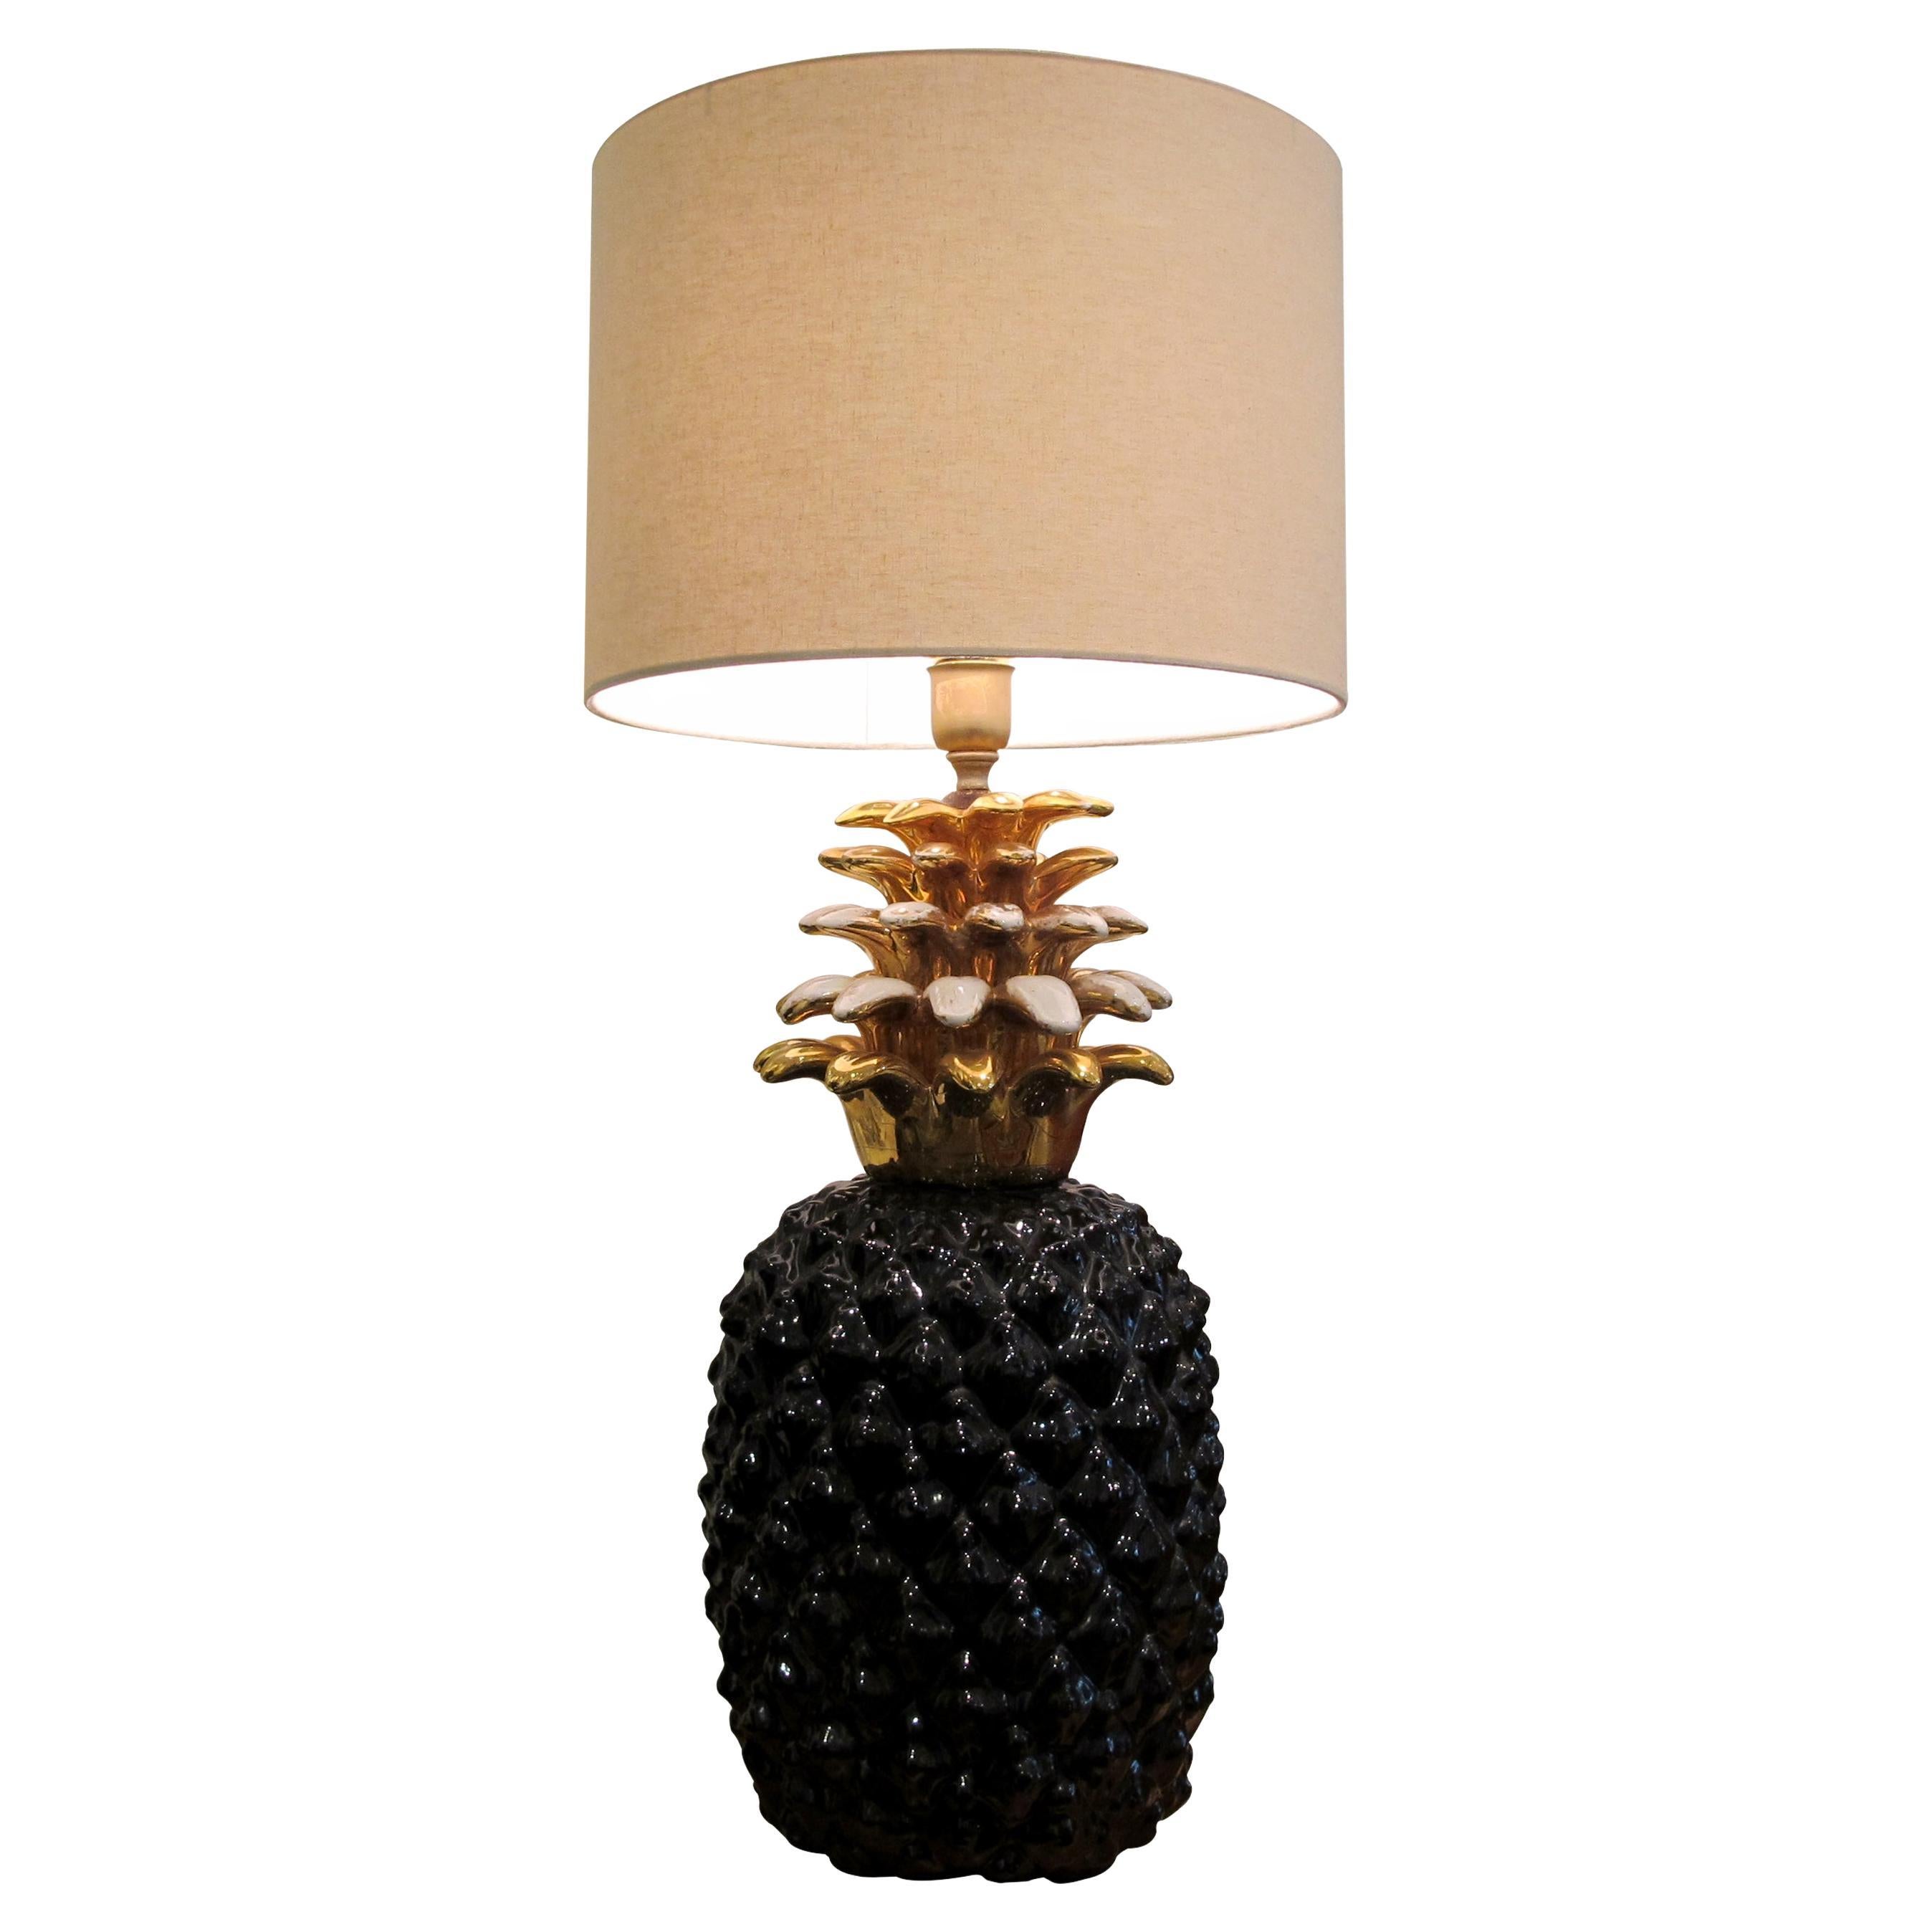 1970s Large French Ceramic Black & Gold Pineapple Table Lamp by Maison Lancel